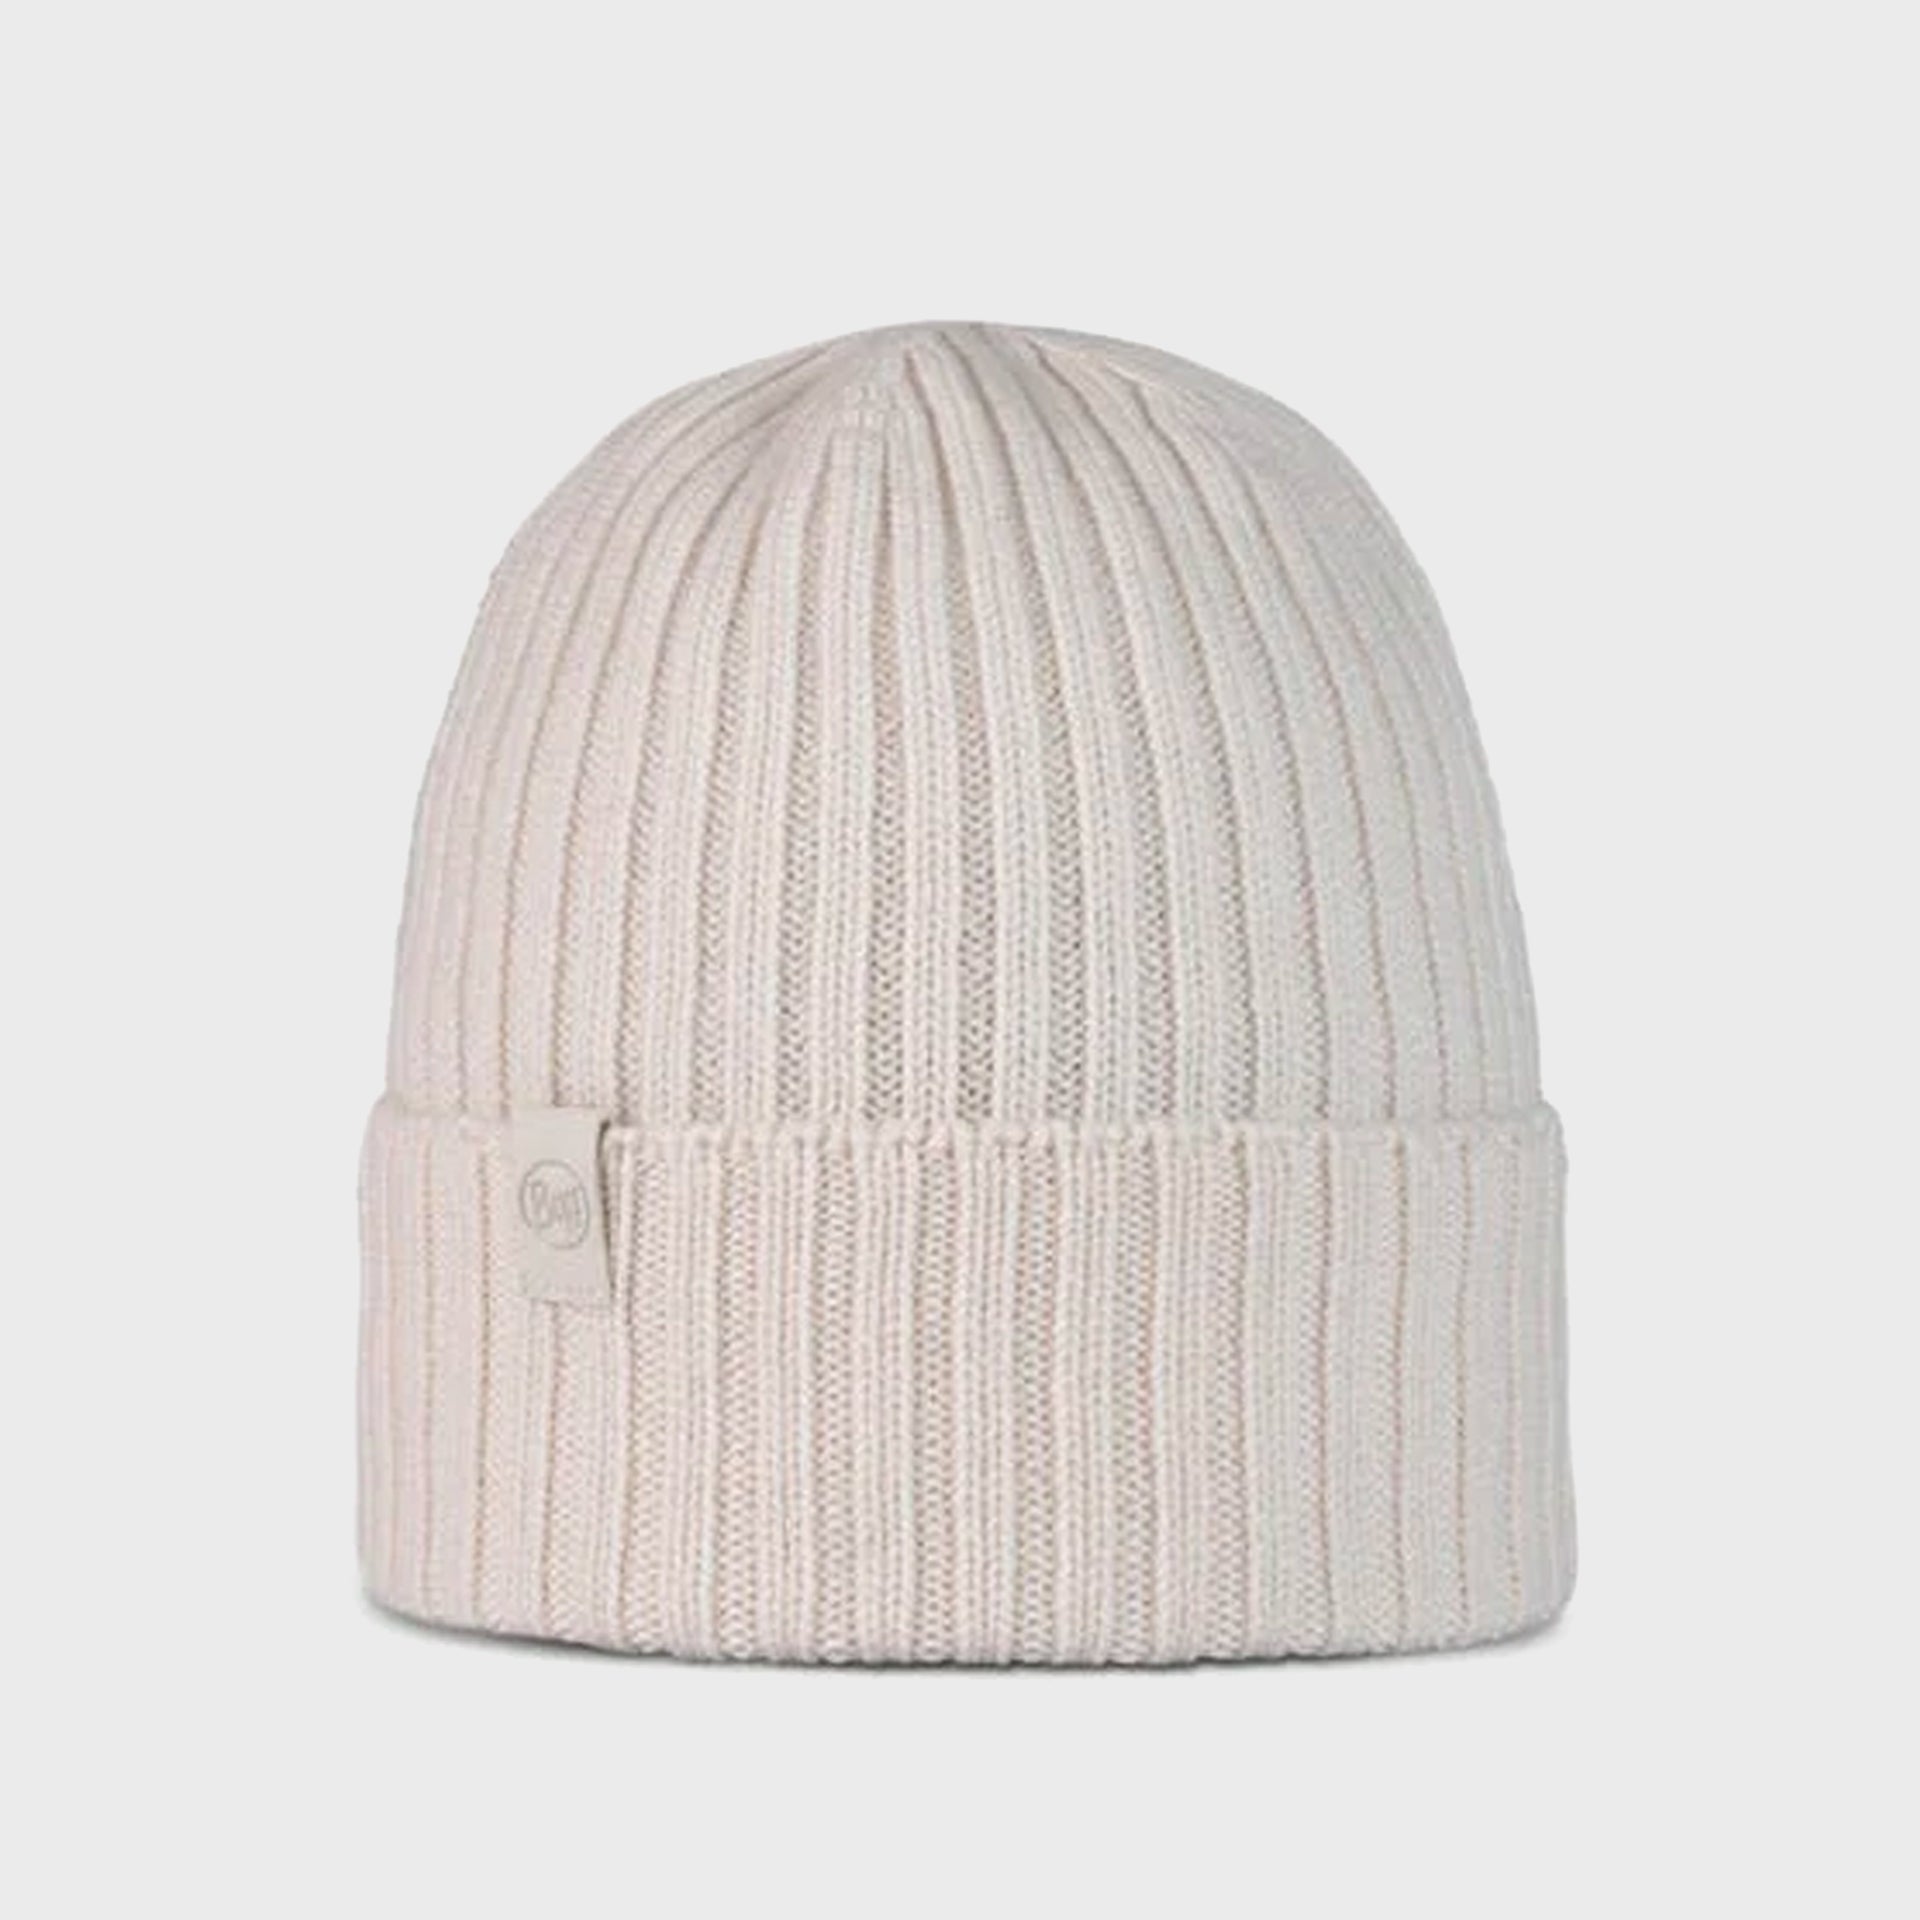 Buff Knitted Beanie Hat - Norval Ice - ManGo Surfing